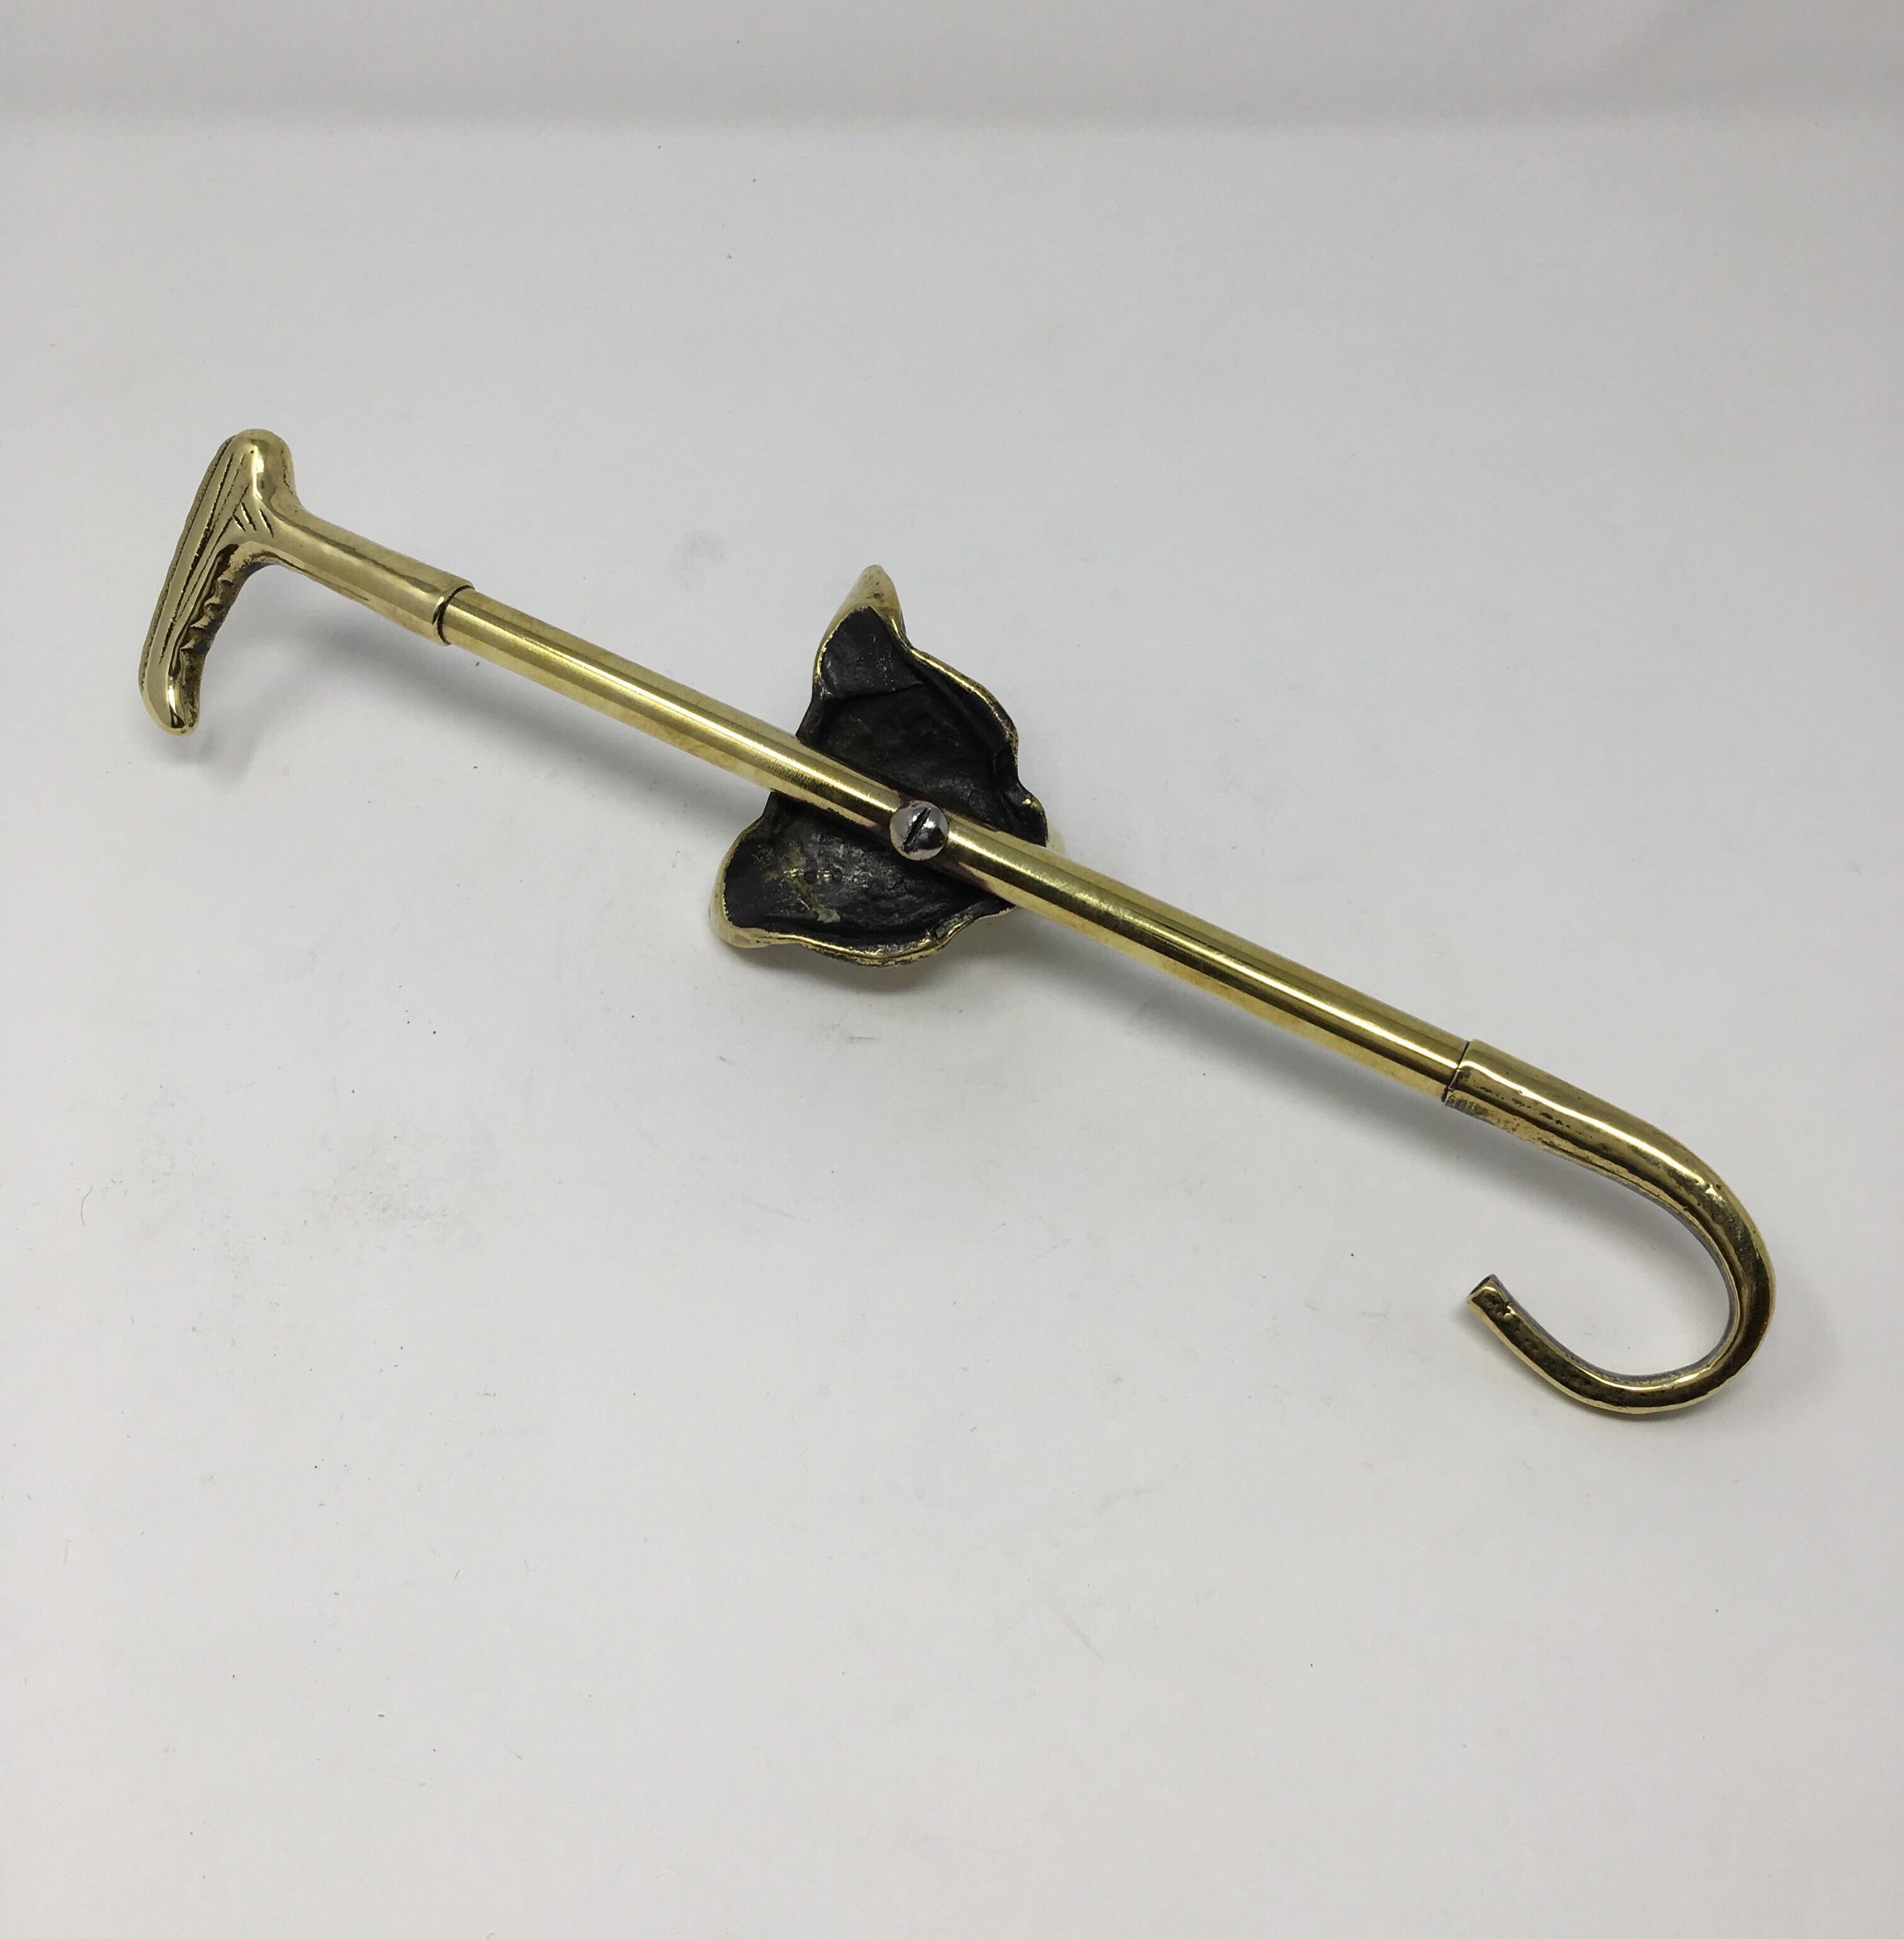 This is an English brass boot hook pull with a decorative fox. Boot pulls are used to aid in pulling on your boots by holding one end and slipping the hook into the leather loop inside your boot. This English boot pull is made of solid brass. This